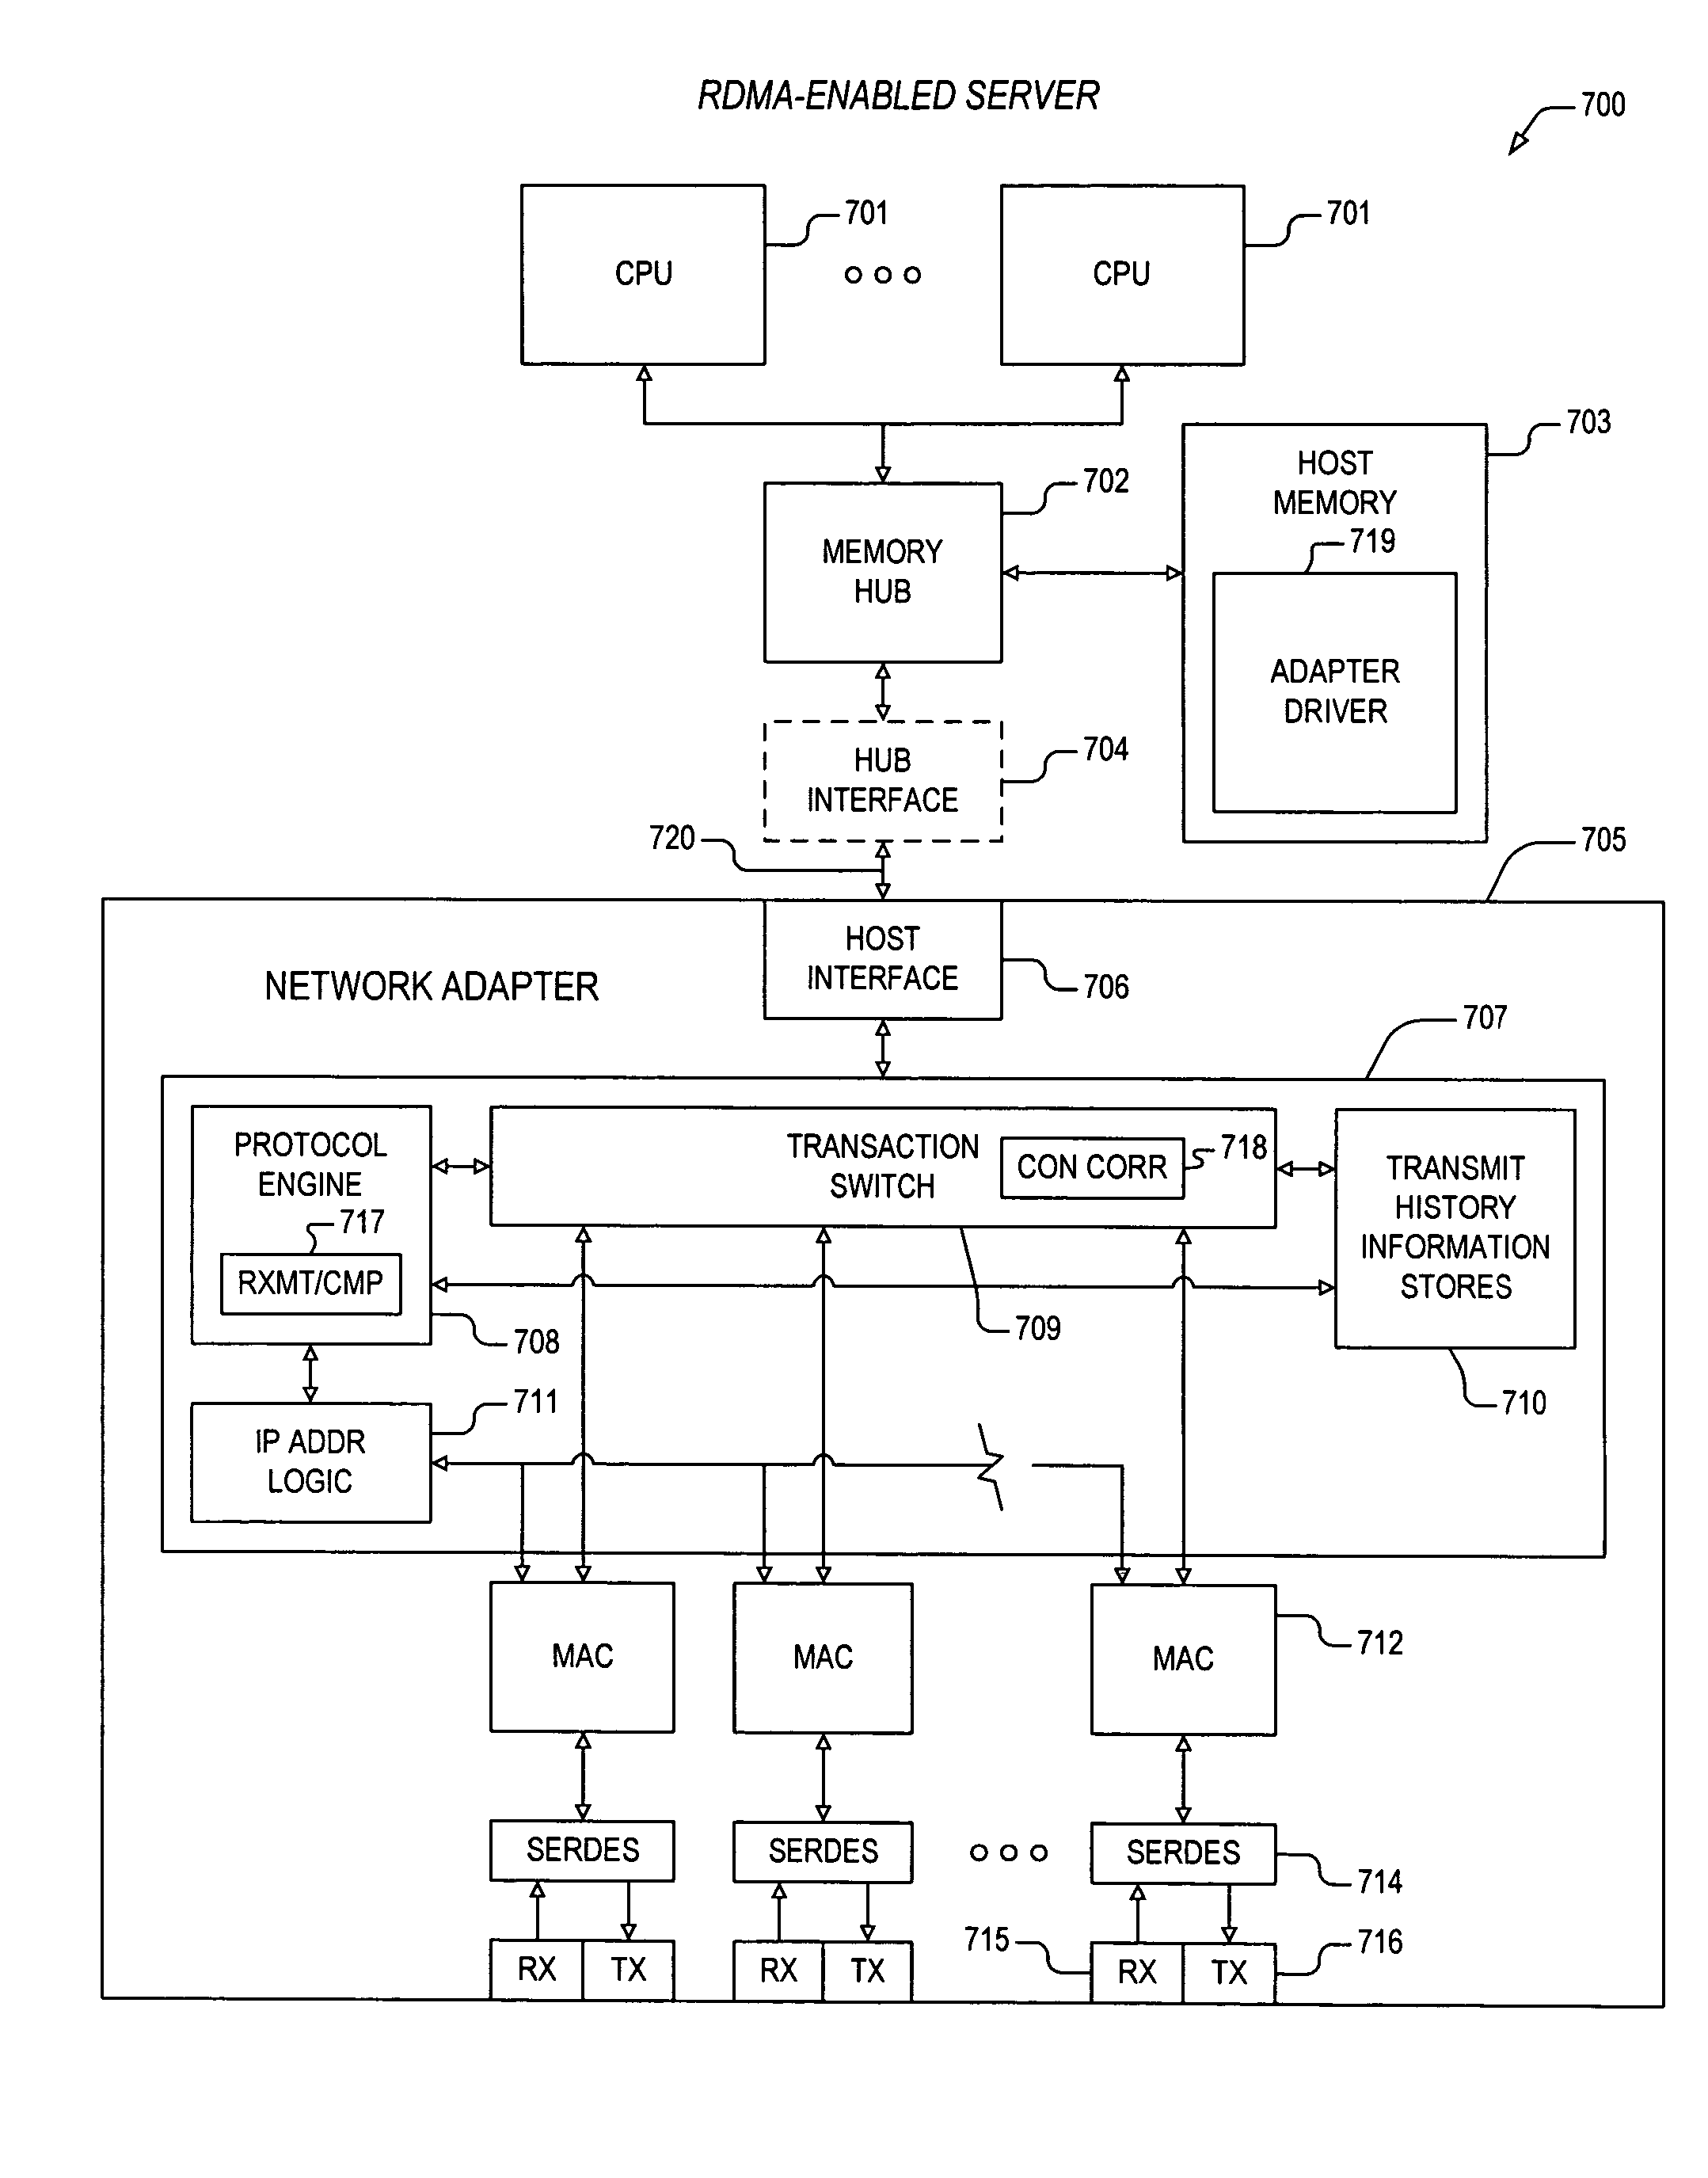 Apparatus and method for packet transmission over a high speed network supporting remote direct memory access operations